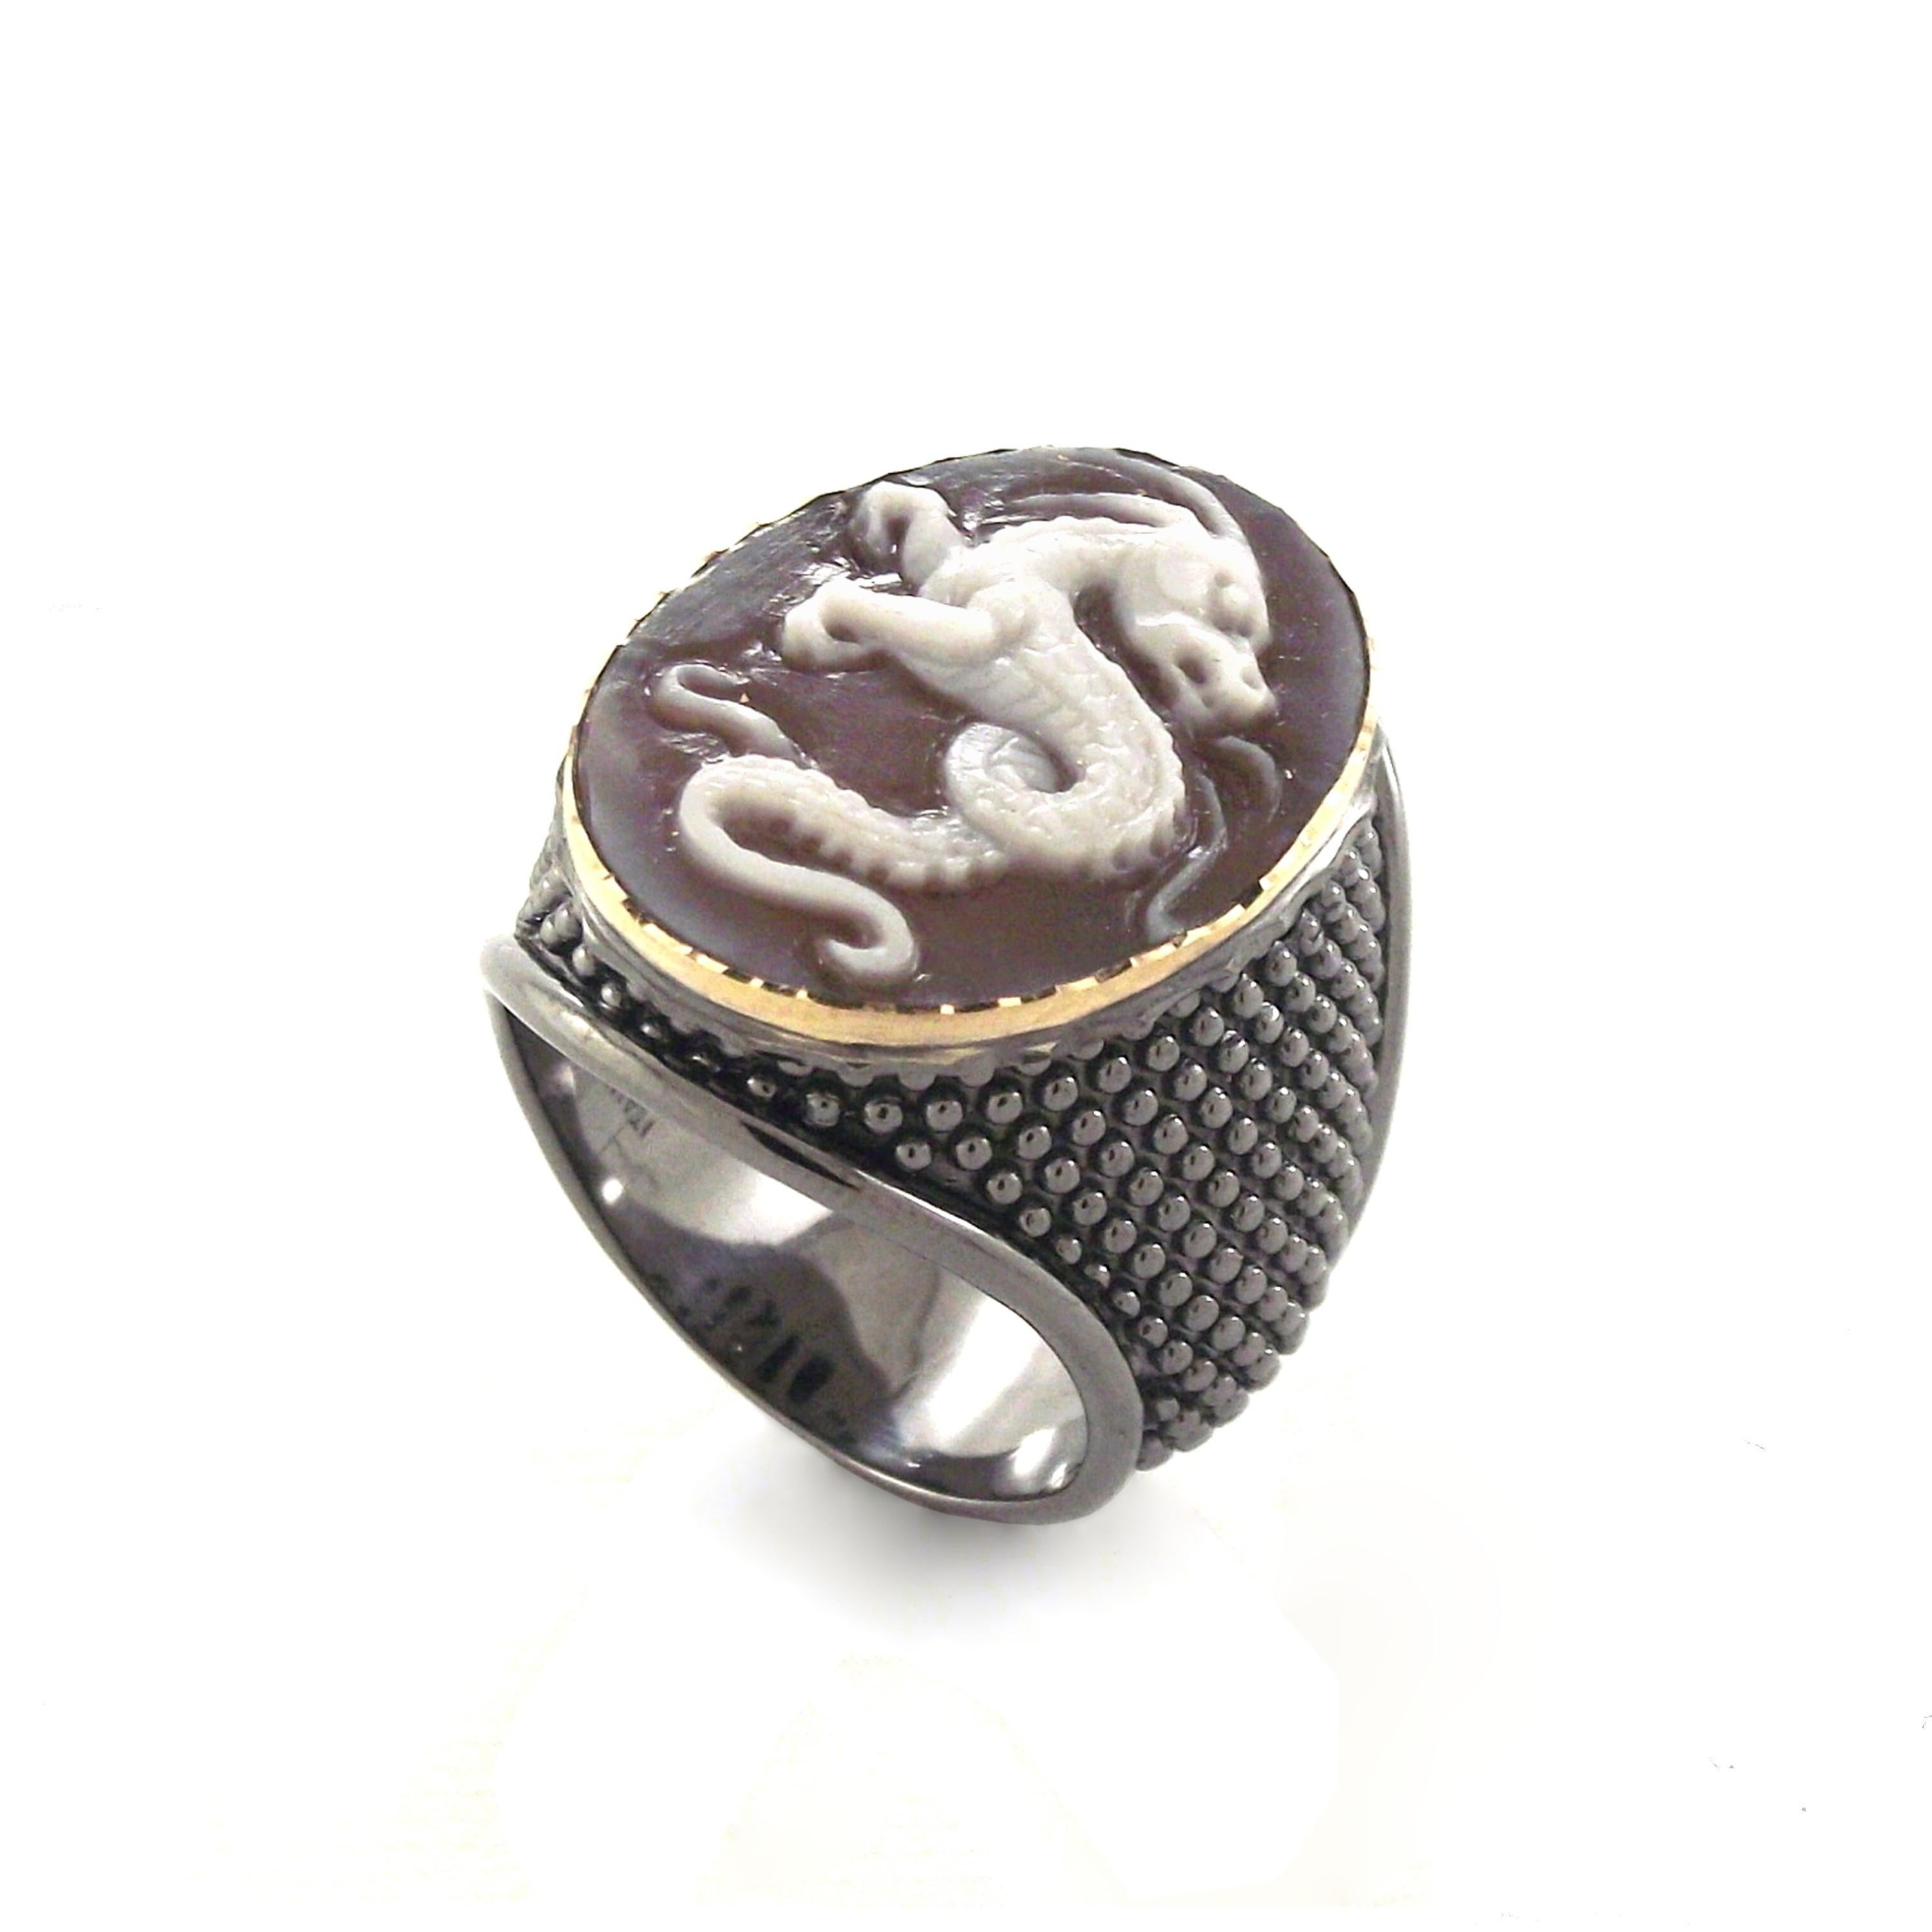 25mm sardonyx cameo, hand-carved, on 18k yellow gold and sterling silver, black rhodium plated.